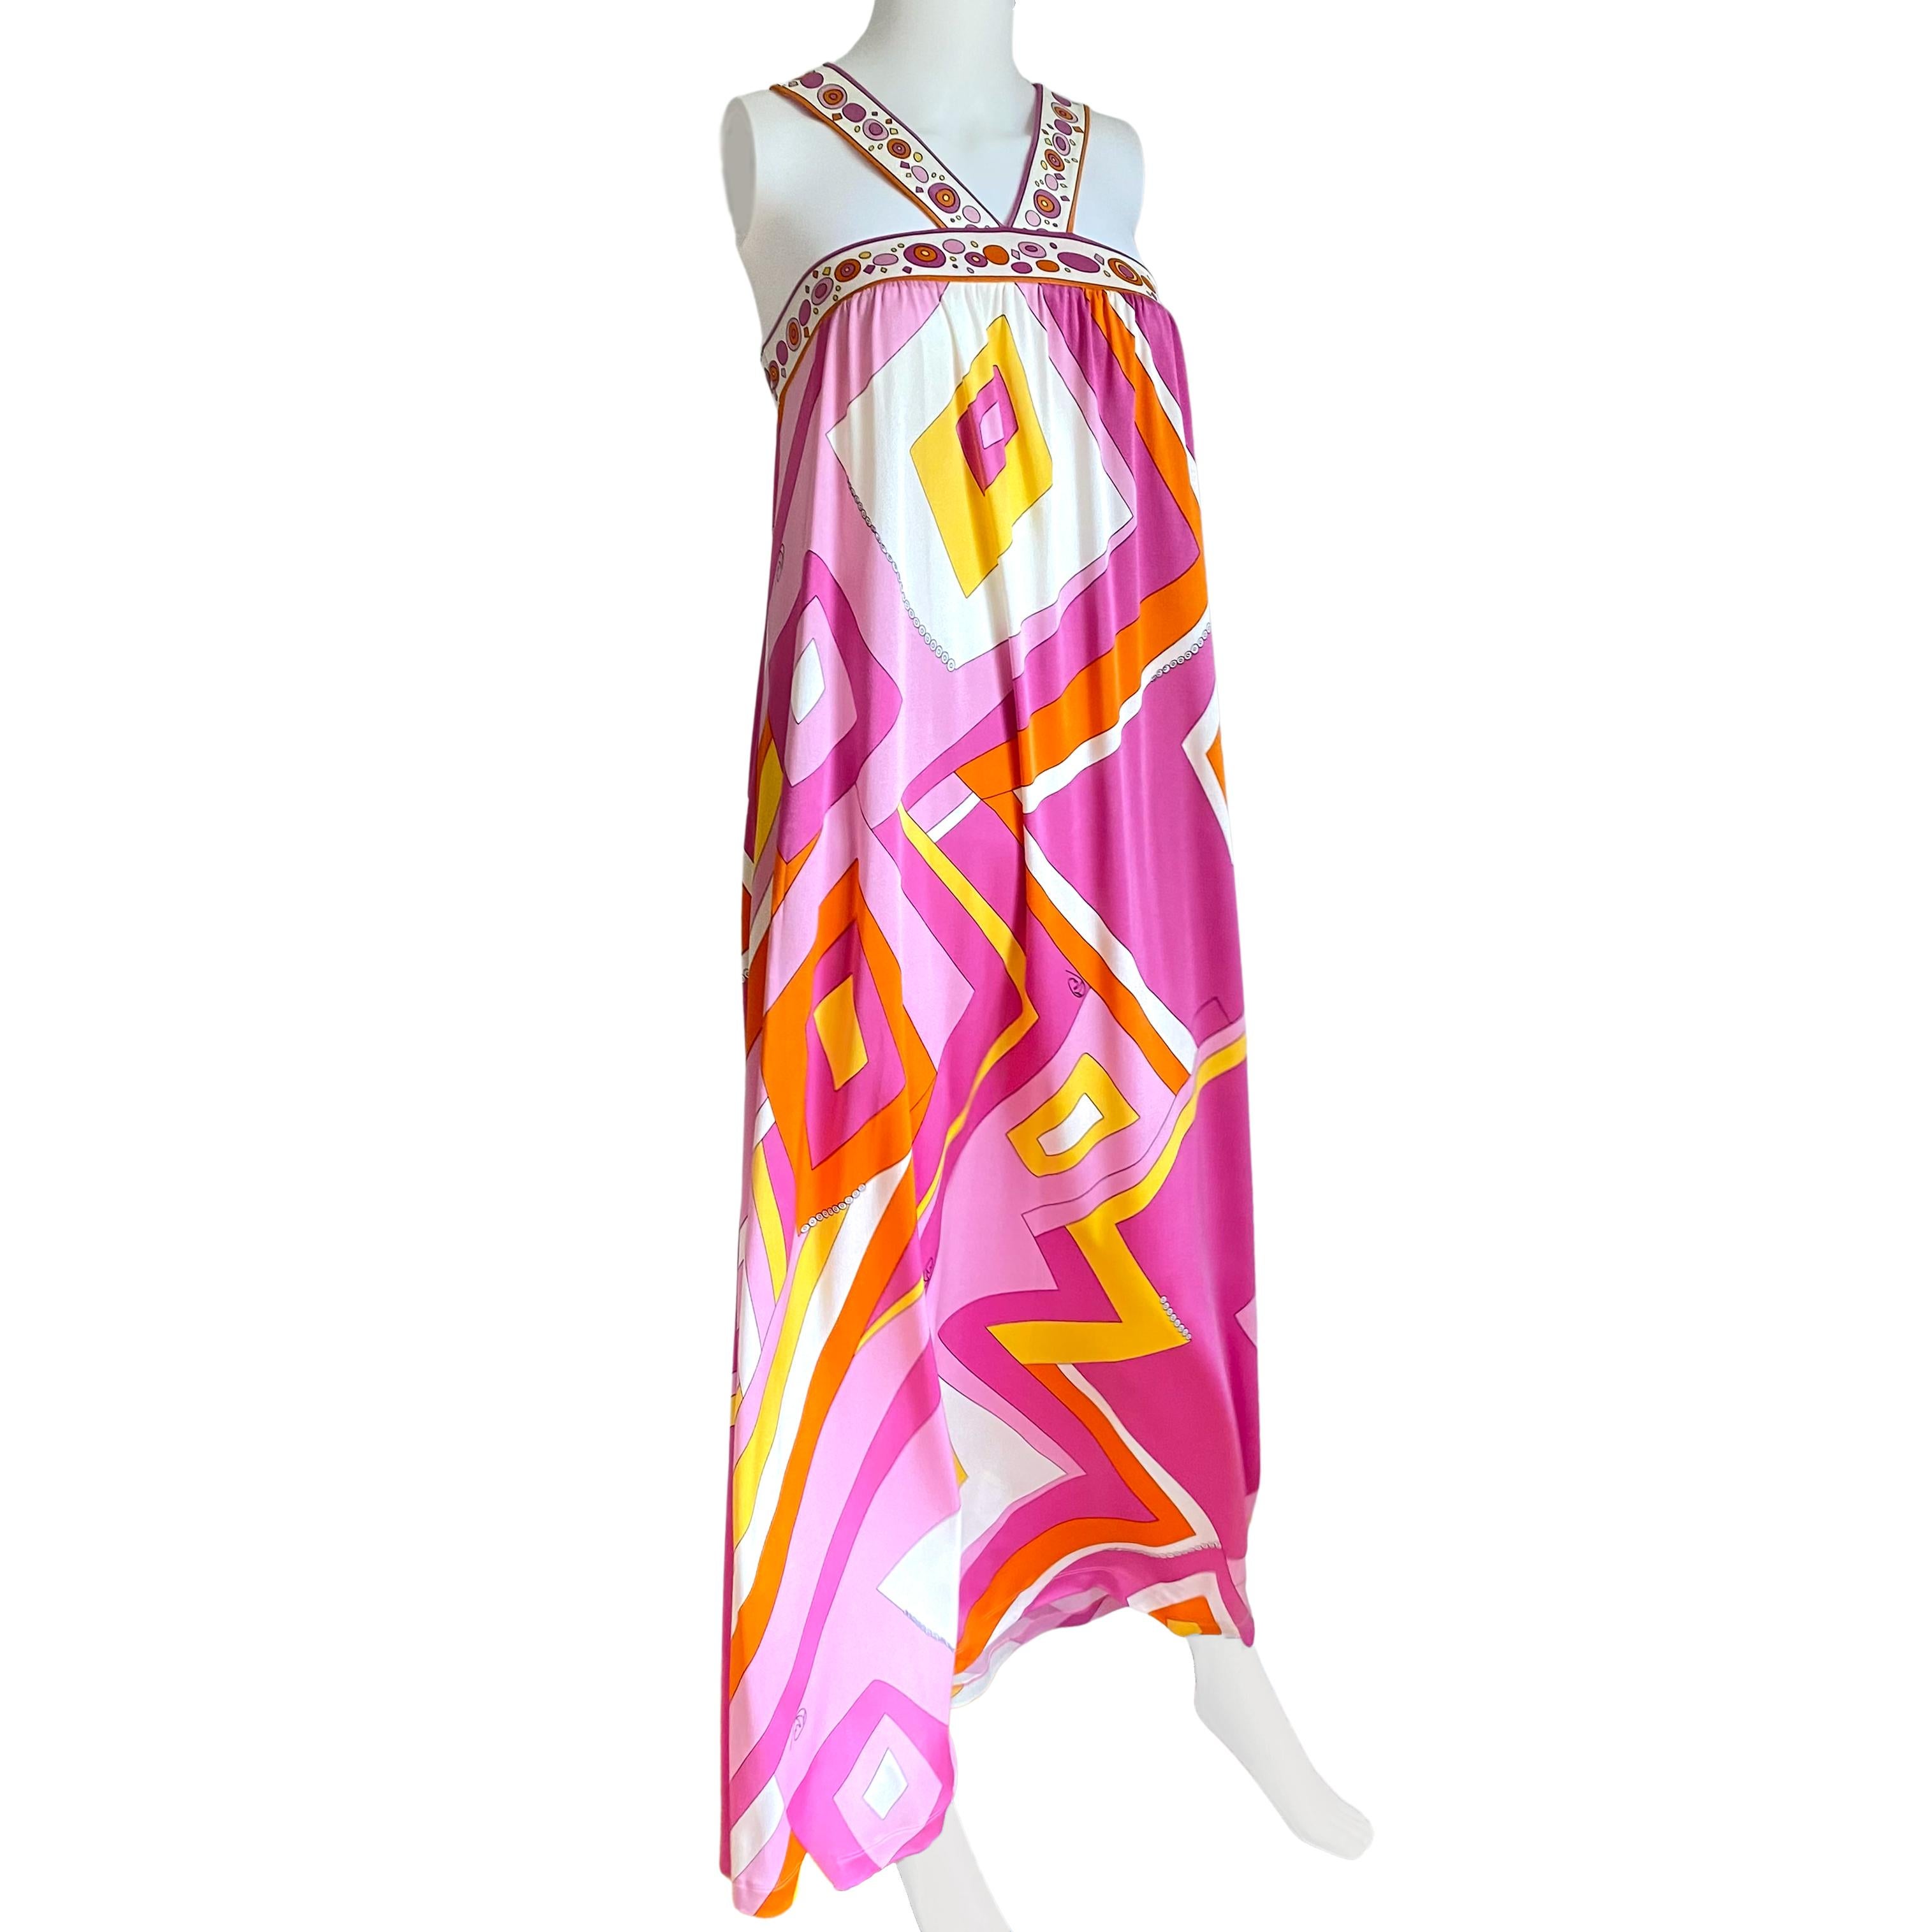 Breezy cool beautiful maxi dress in flattering pink yellow mixed deco print.
Wear it with a belt or as is. Dress it up or down.
Stretchy back band for a perfect fit. Generous skirt made with yards of luxurious pure silk jersey.
Label S. 
Condition: